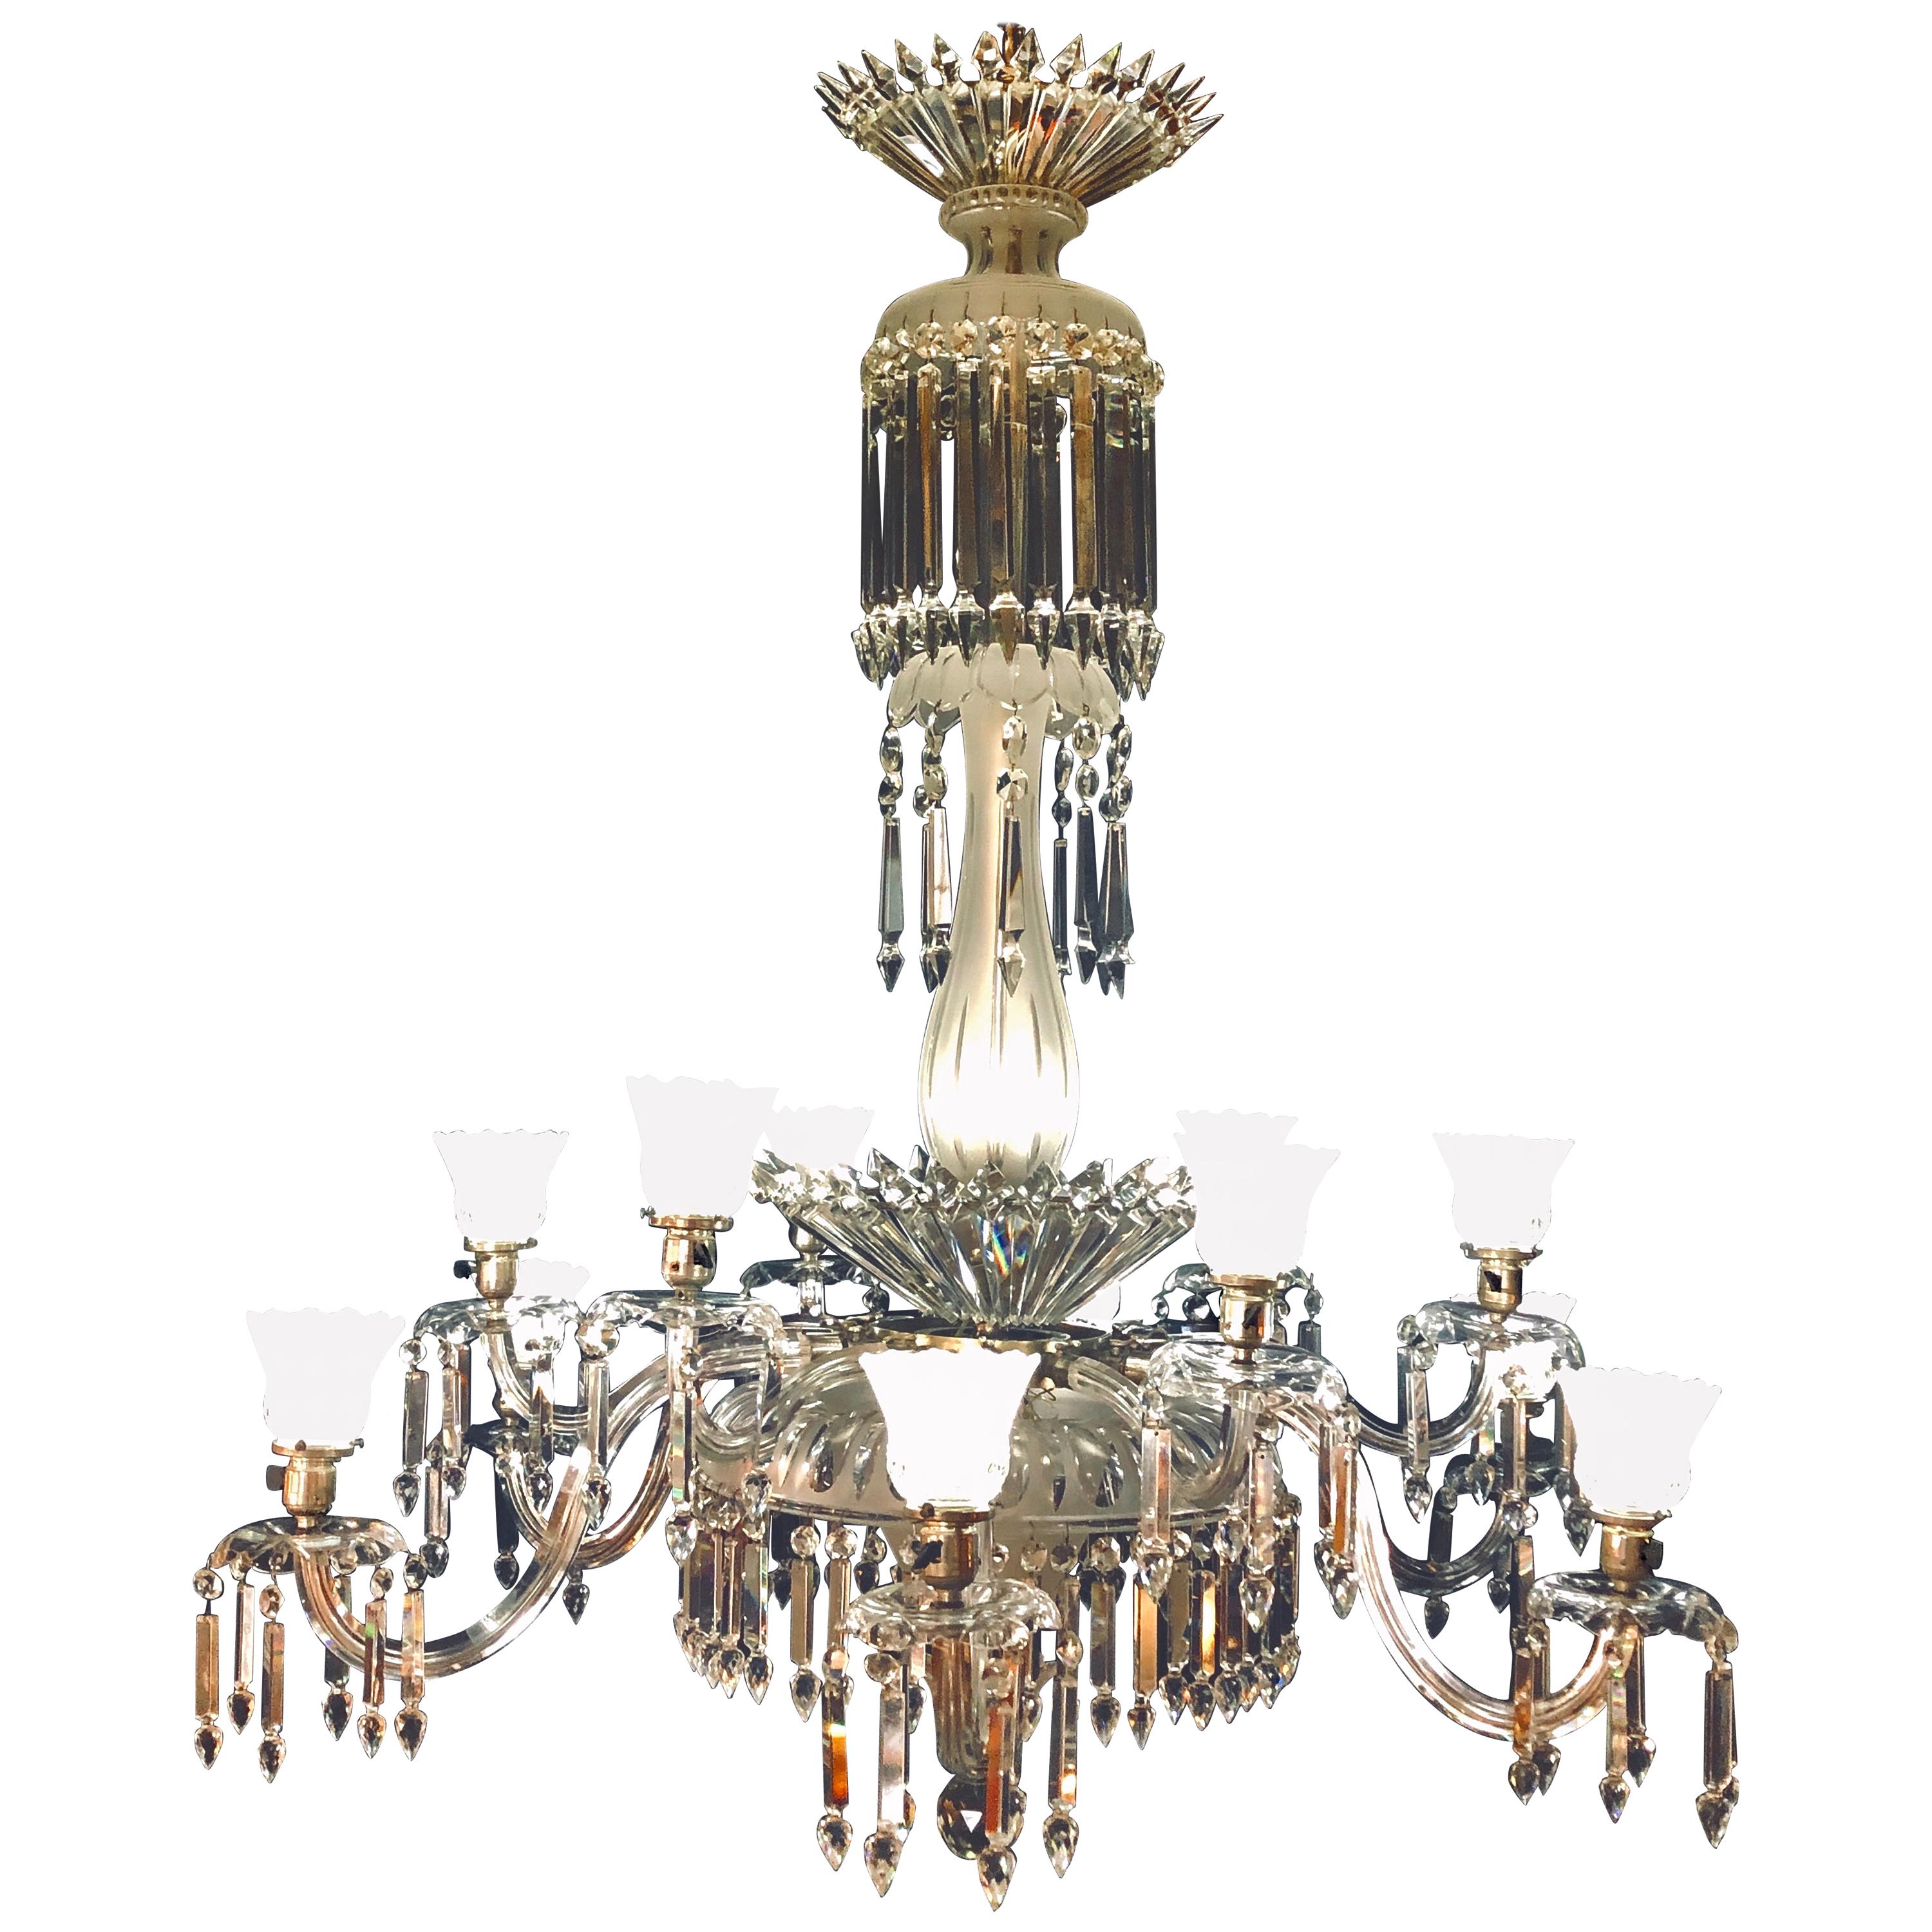 Victorian 19th Century Crystal & Lalique Style Cornelius & Baker Chandelier For Sale